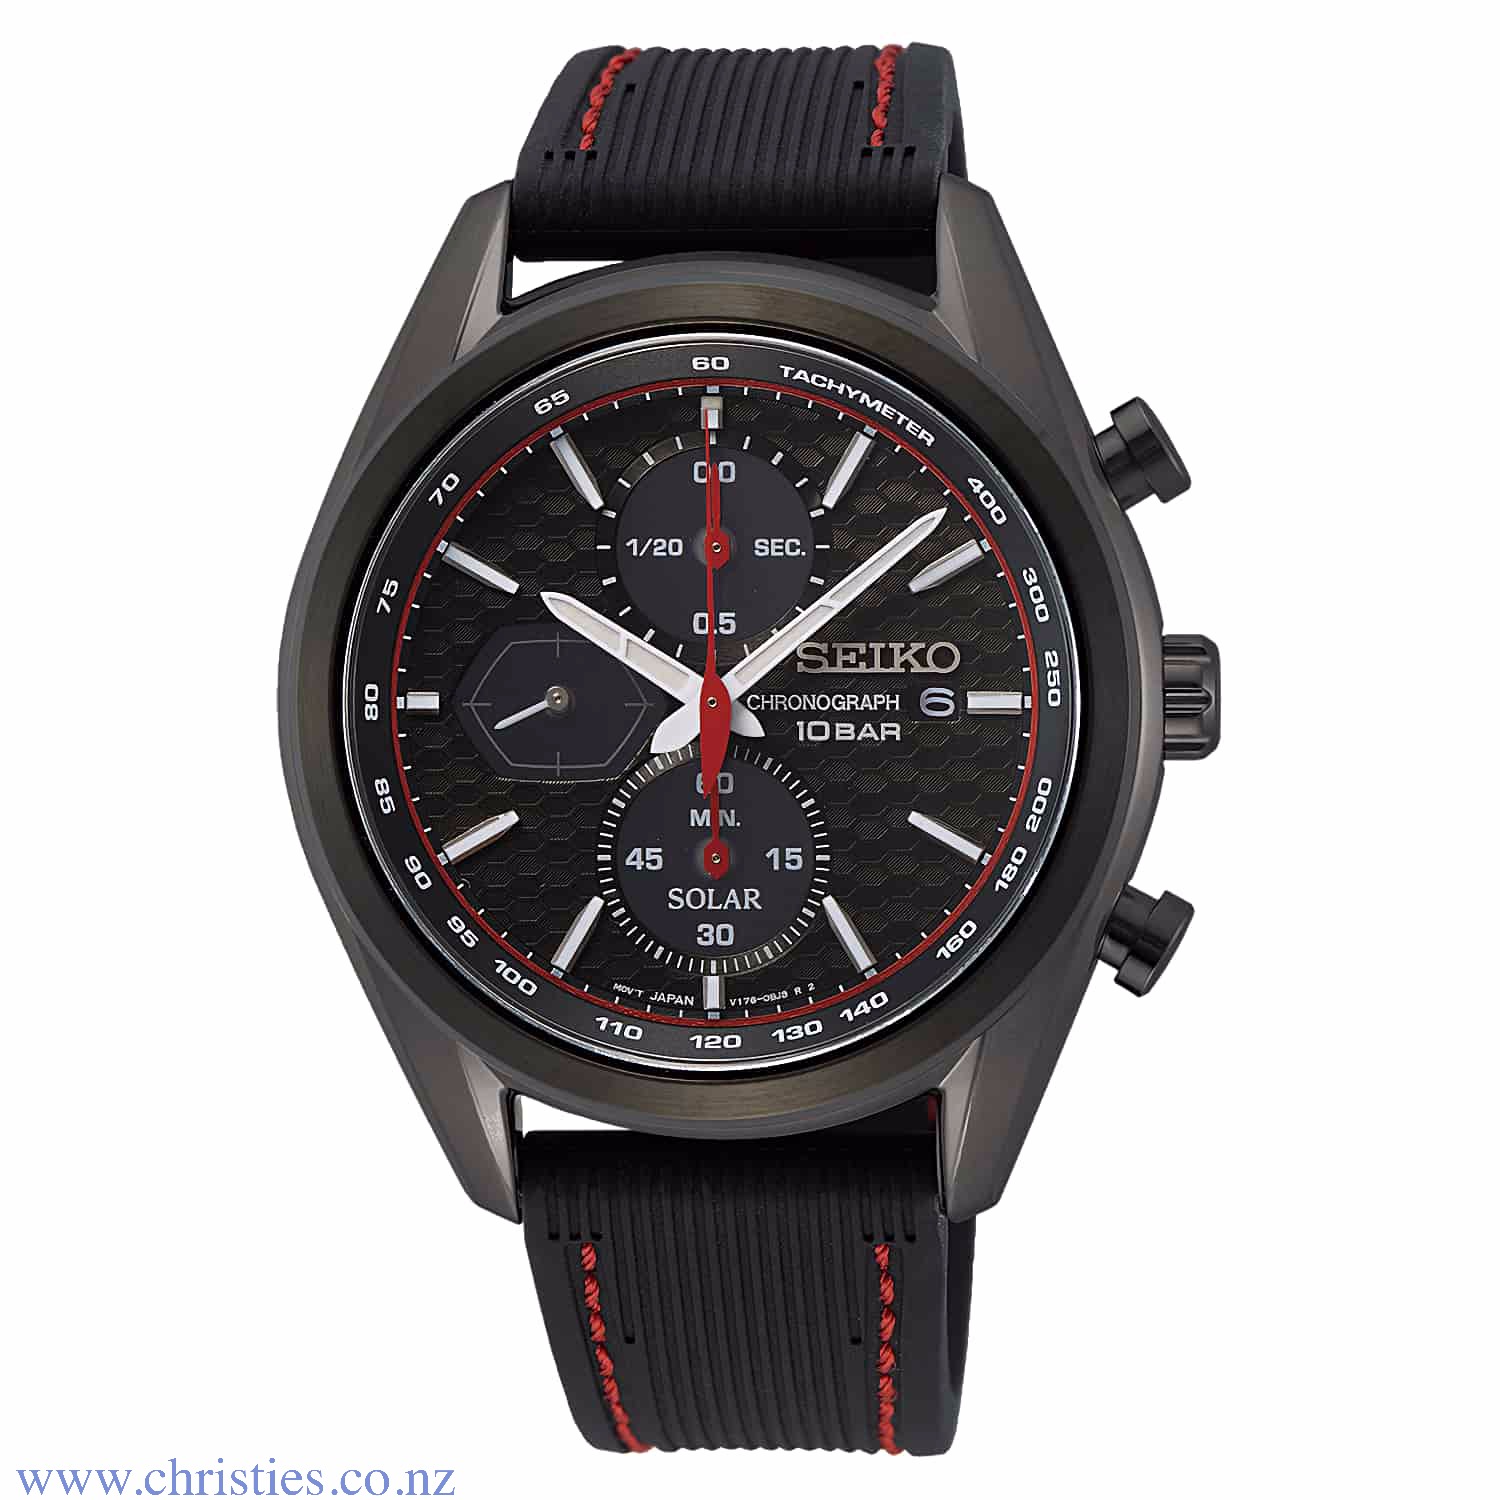 SSC777P1 SEIKO Conceptual Macchina Sportiva Solar Alarm Chronograph. Sporty and stylish, this Seiko Sportiva Solar chronograph watch features a round stainless steel case                 and a silicon band. LAYBUY - Pay it easy, in 6 w @christies.online